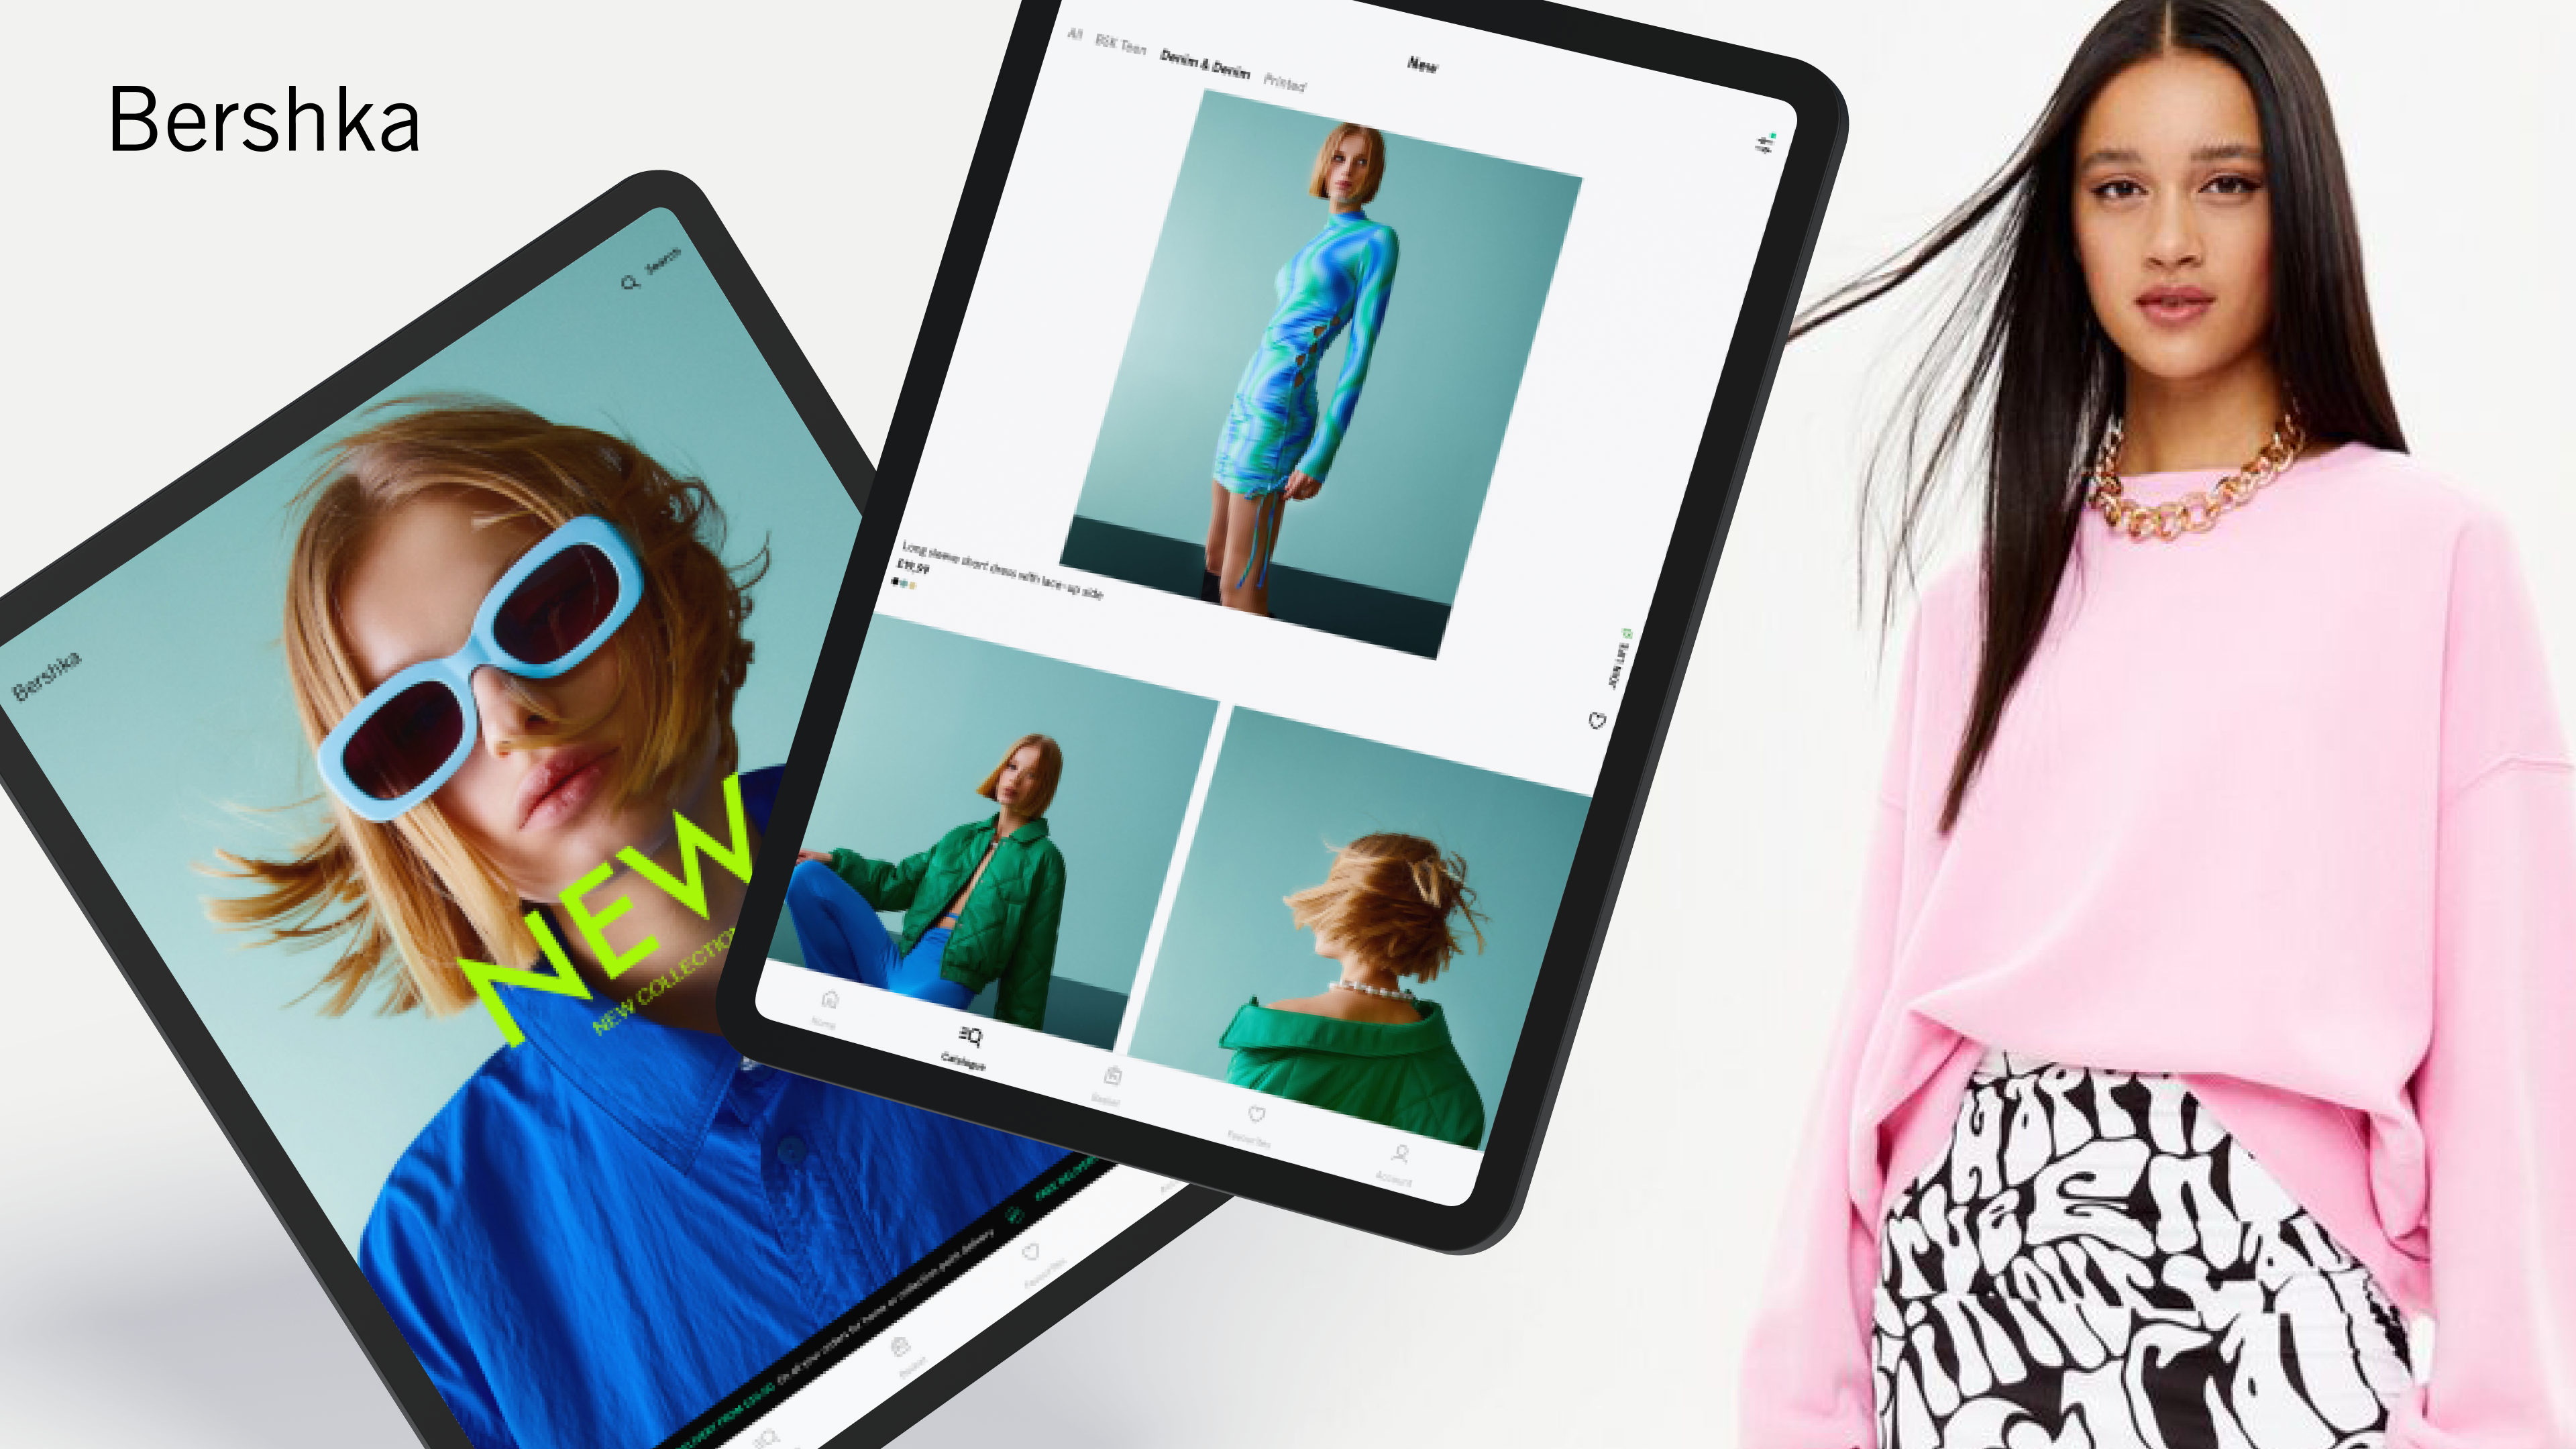 Bershka: Fashion & trends APK 9.0.0 for Android – Download Bershka: Fashion  & trends APK Latest Version from APKFab.com